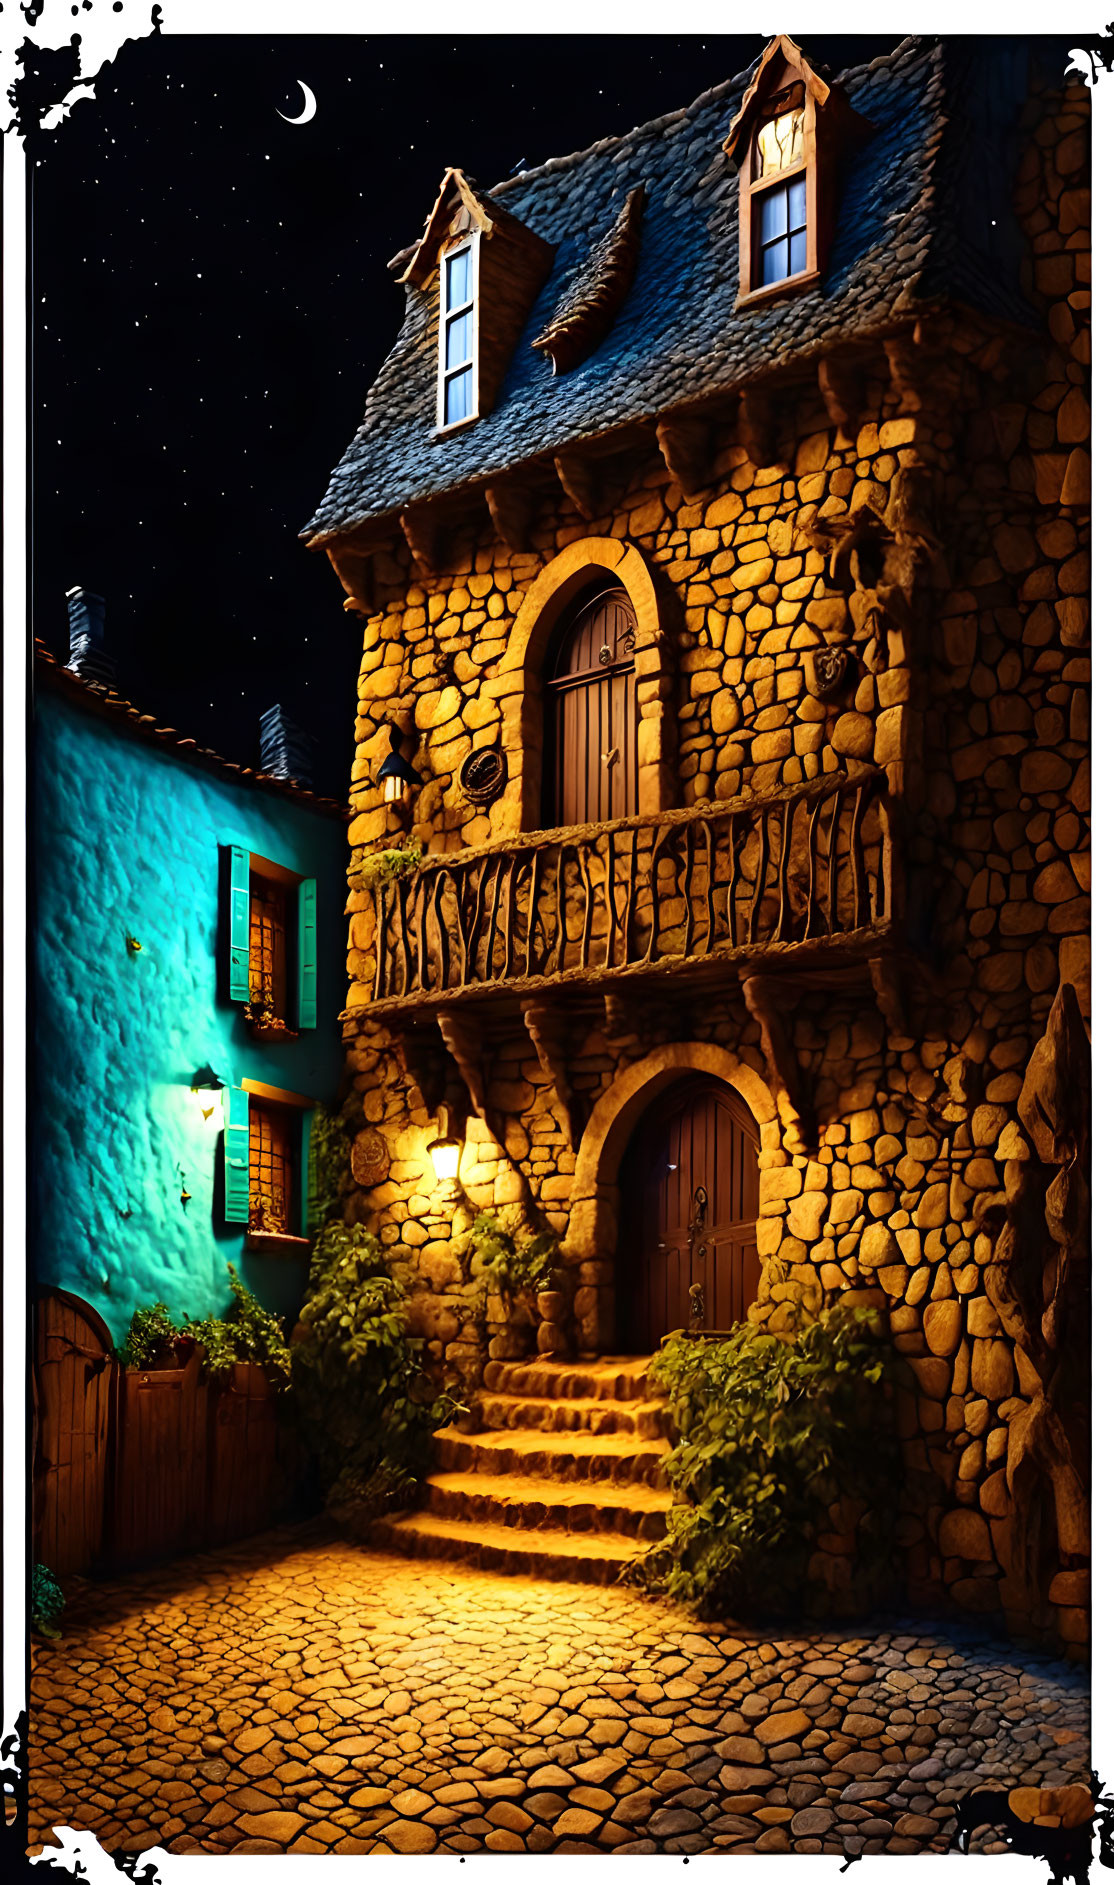 Stone cottage with wooden balcony under starry sky next to blue house